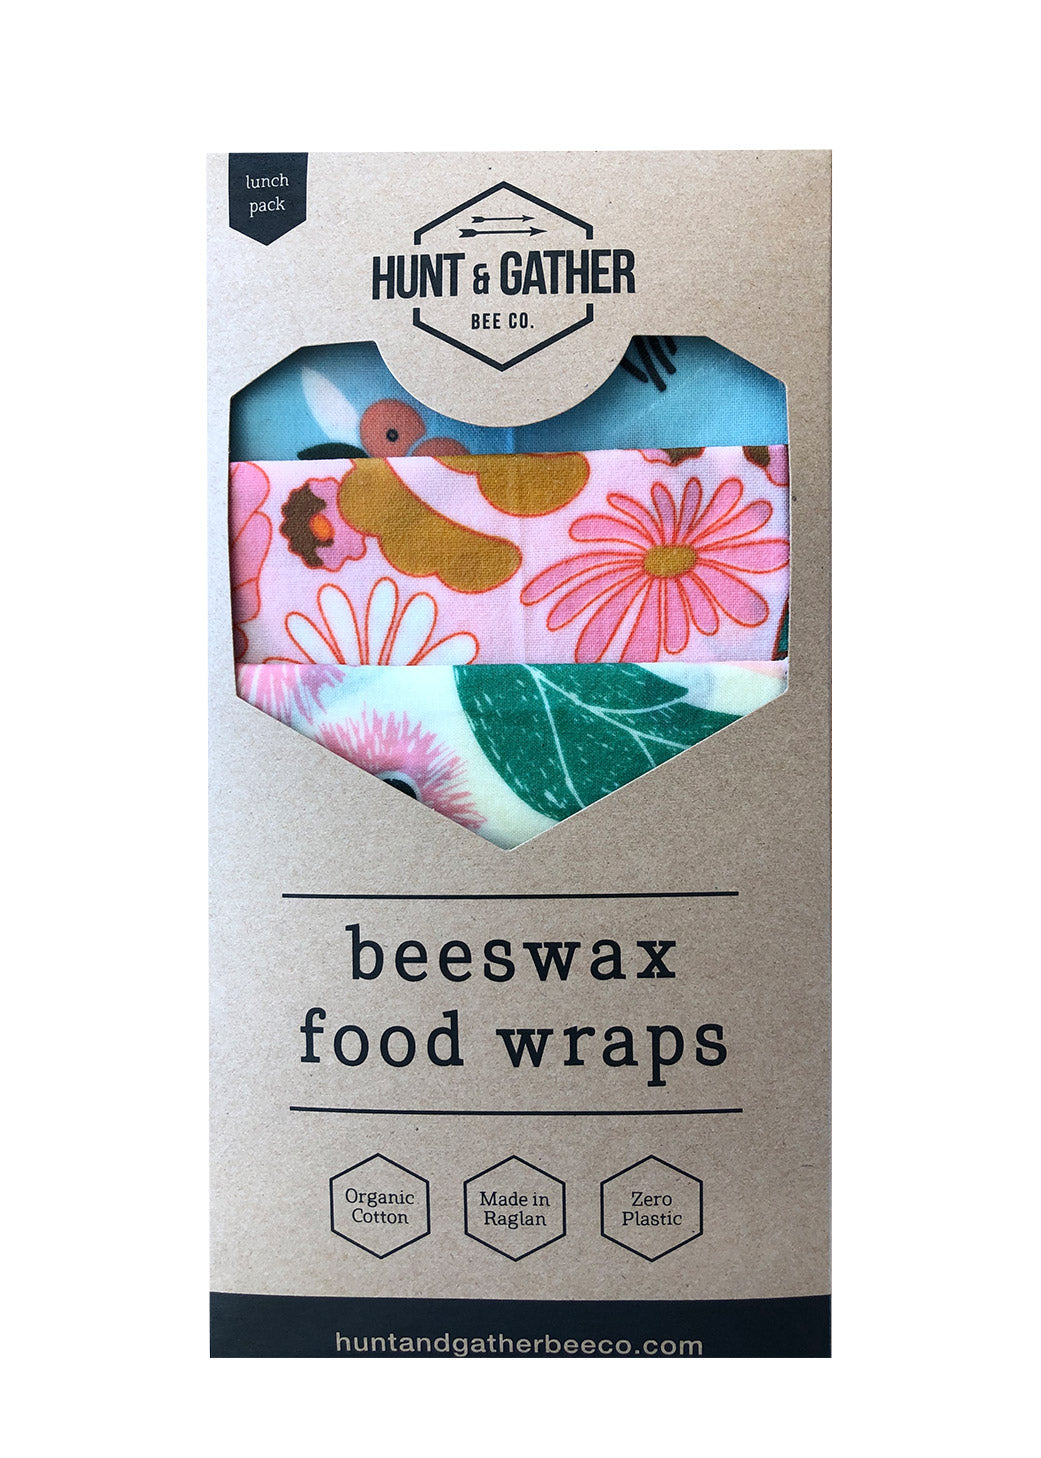 Beeswax Food Wraps - Lunch Packs